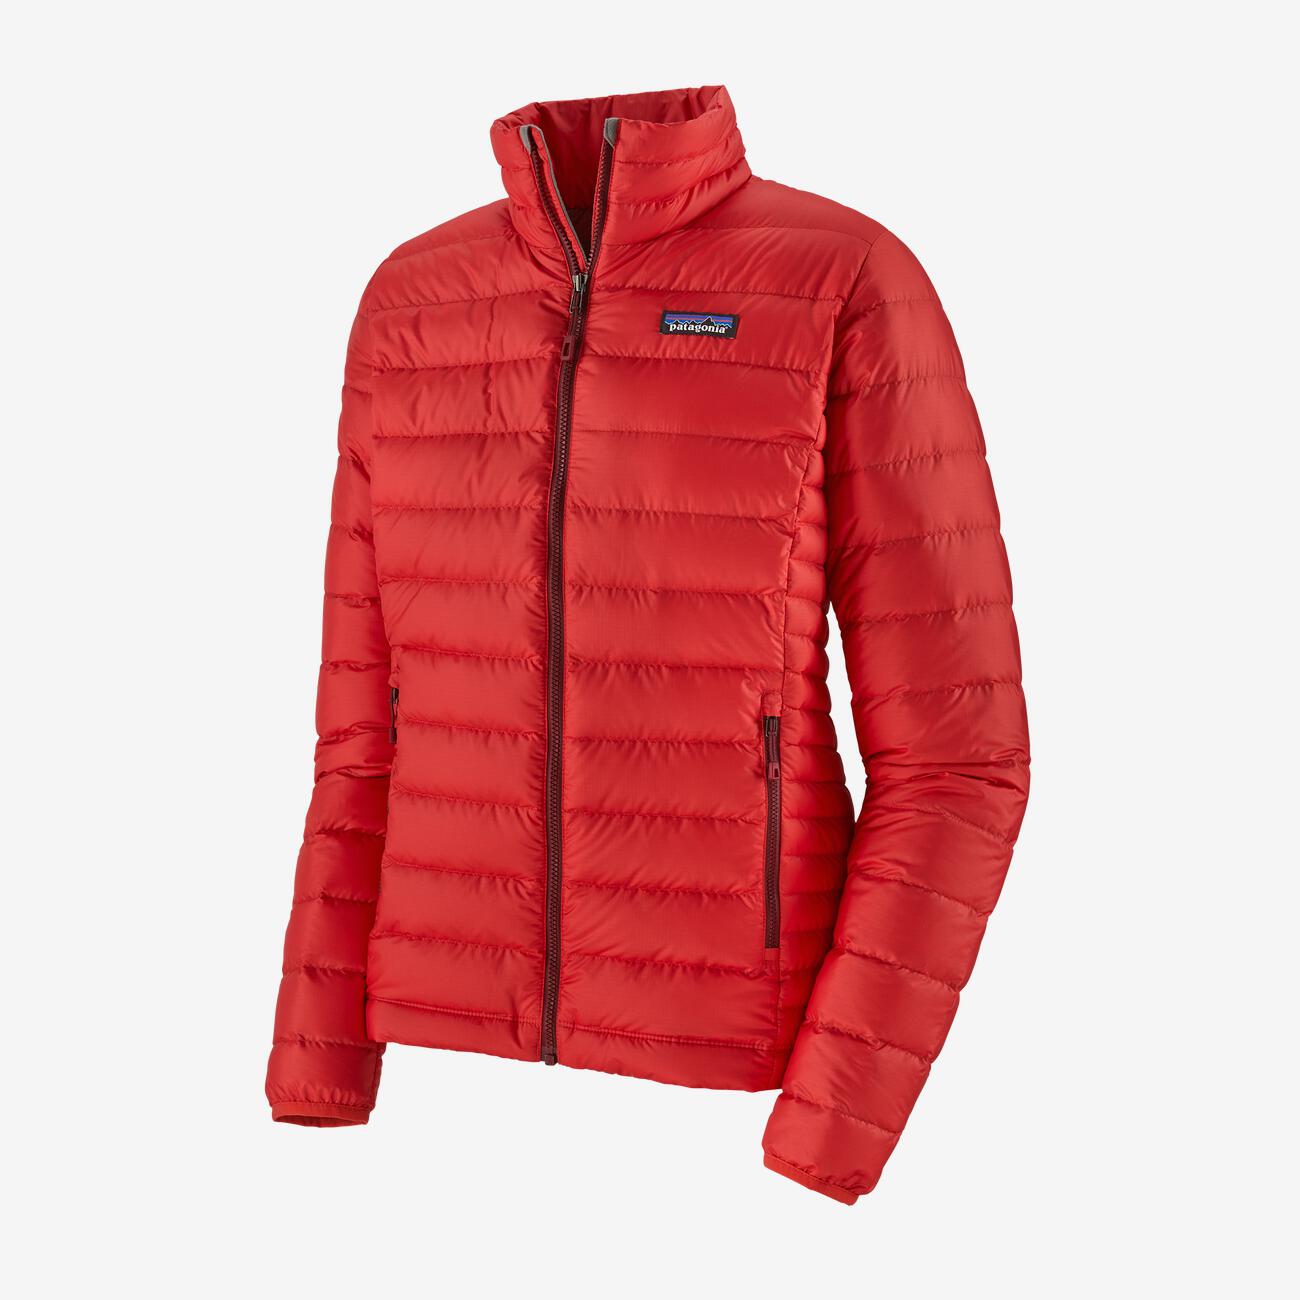 Patagonia Women's Down Sweater Jacket - Sustainable Down, Catalan Coral w/Catalan Coral / L